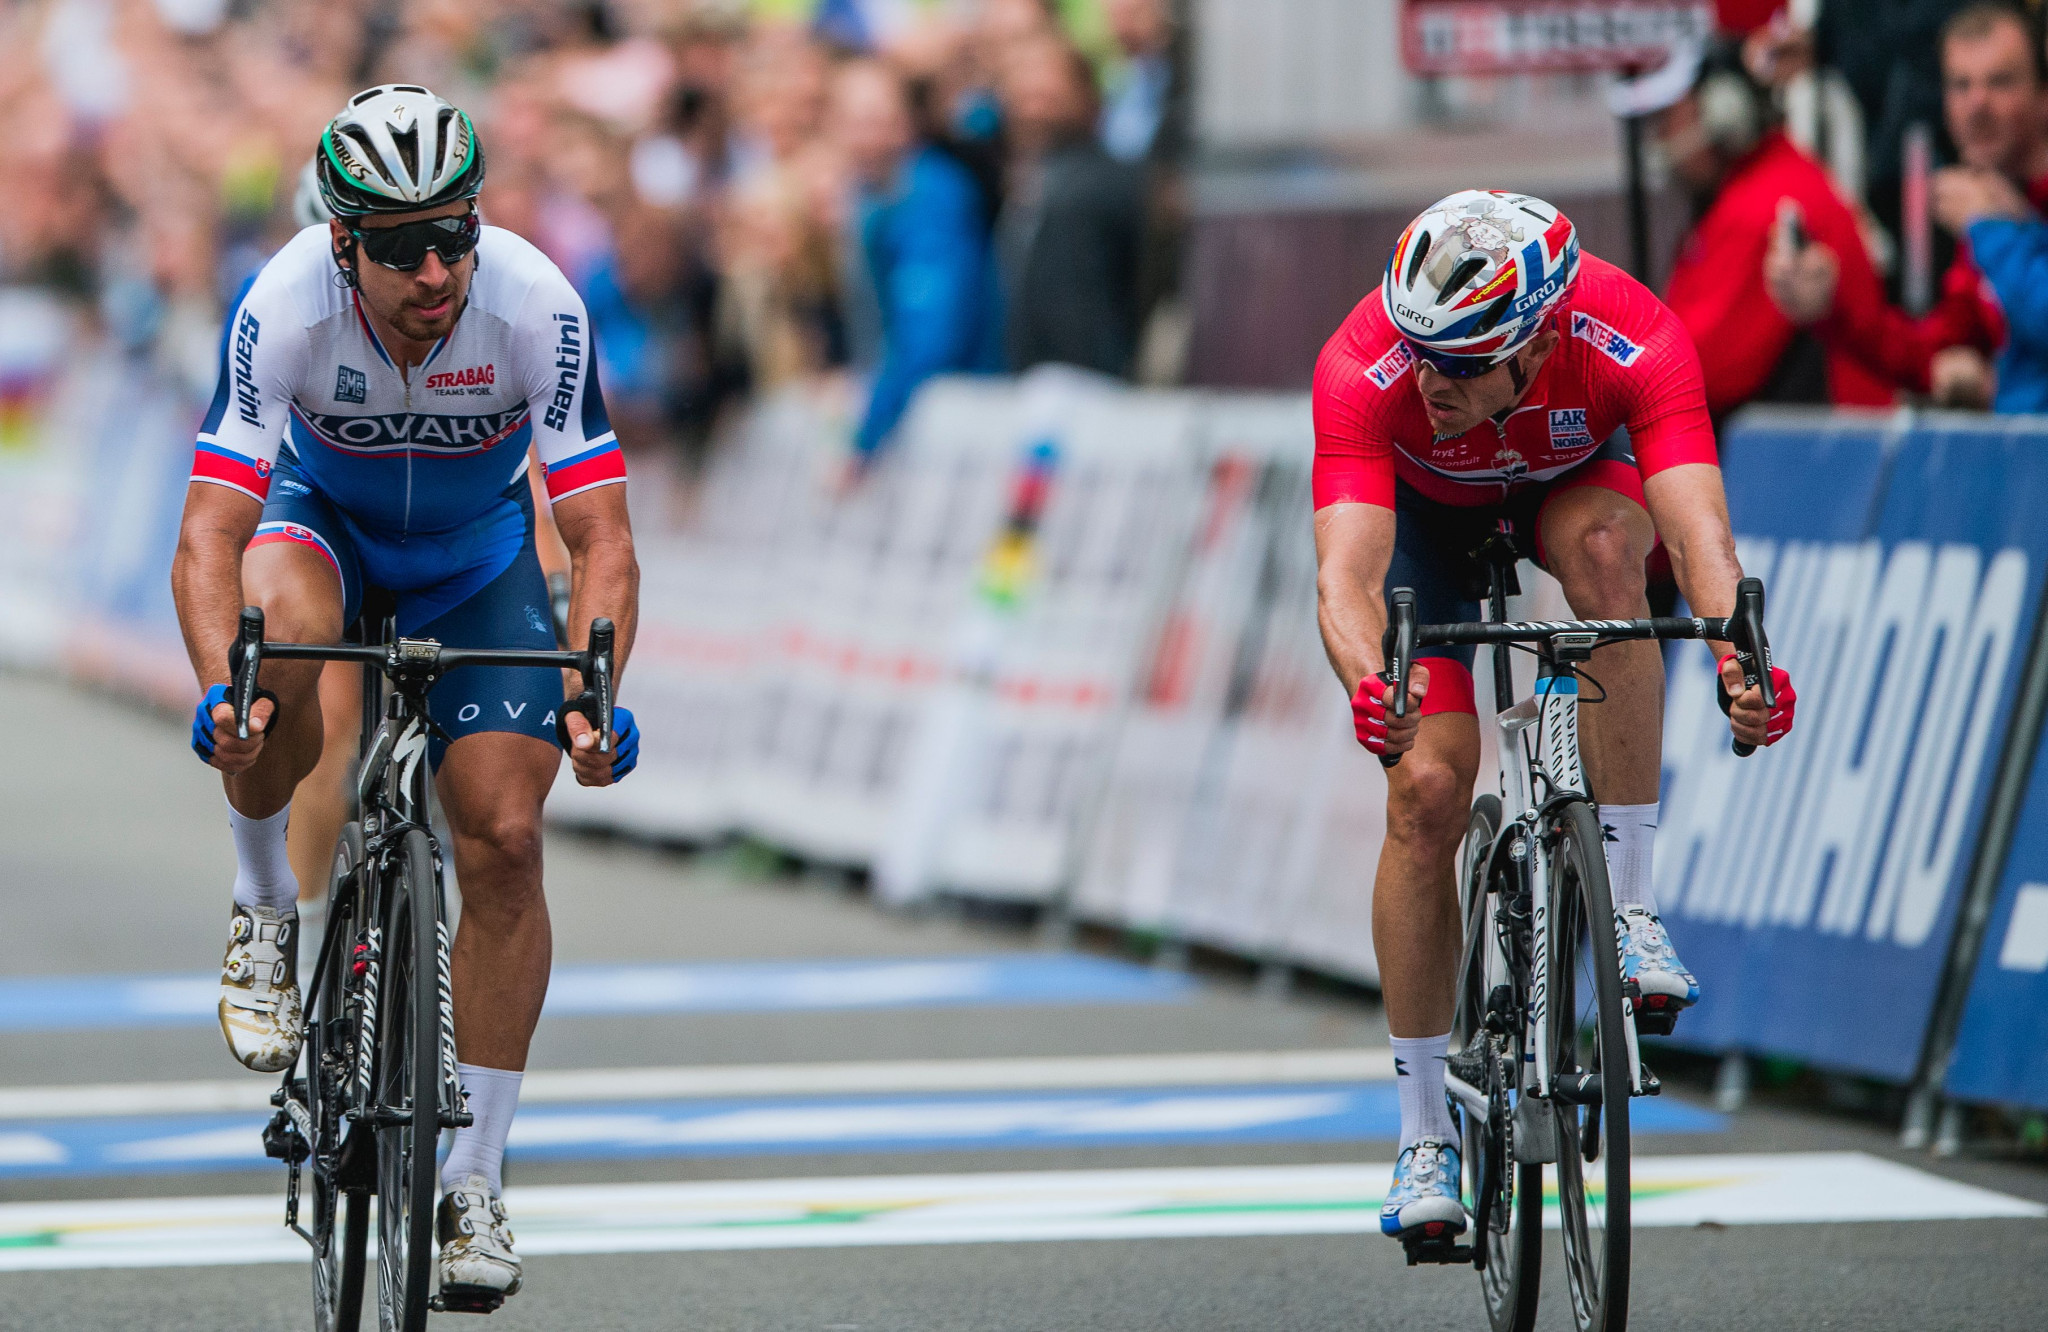 Slovakia's Peter Sagan, left, won the men's elite road race at the 2017 Road World Championships in Bergen in Norway for the third consecutive time ©Getty Images